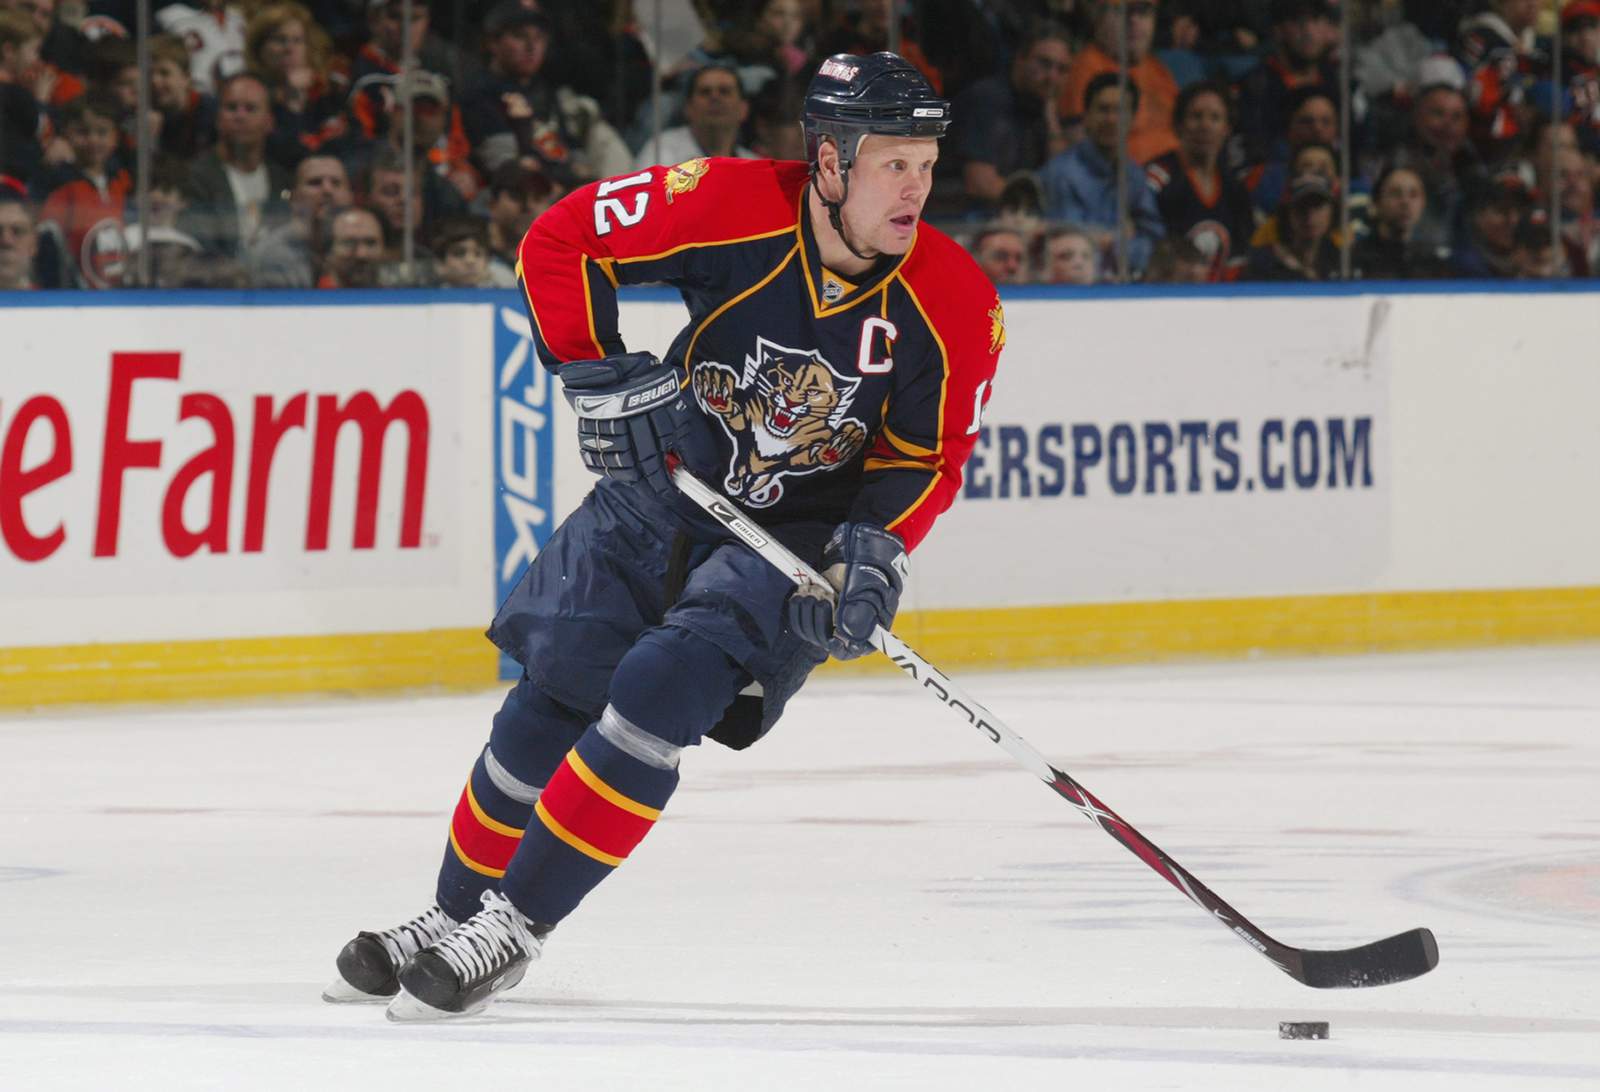 Former Panthers captain Olli Jokinen takes head coaching job in Liiga, Finland’s top pro league